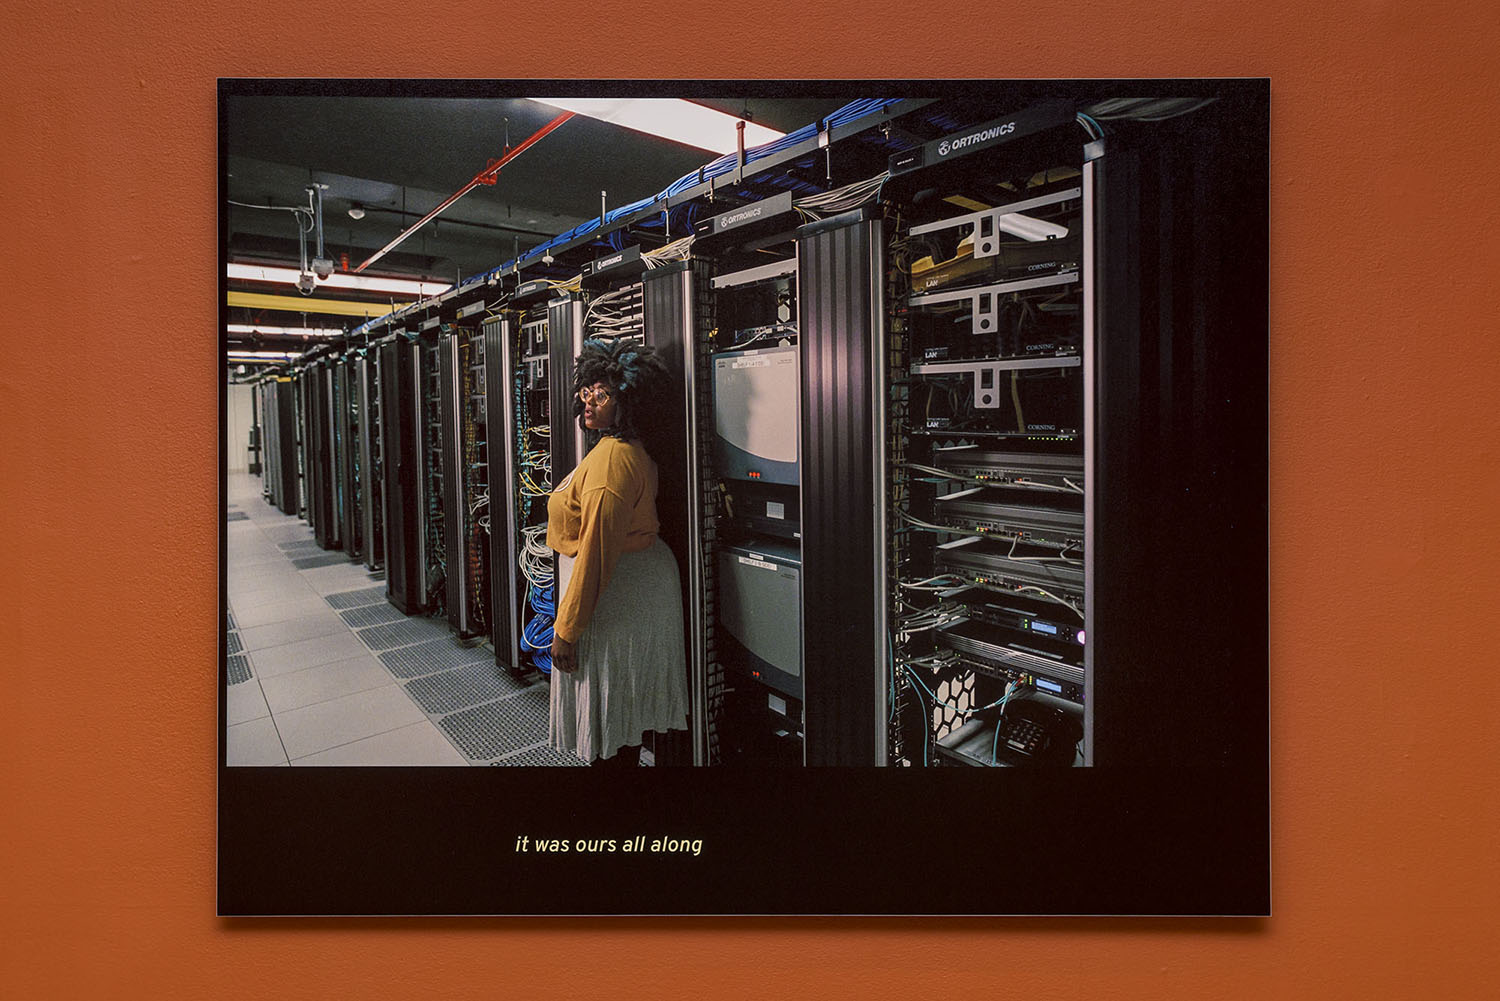 Photo of a woman in a data center